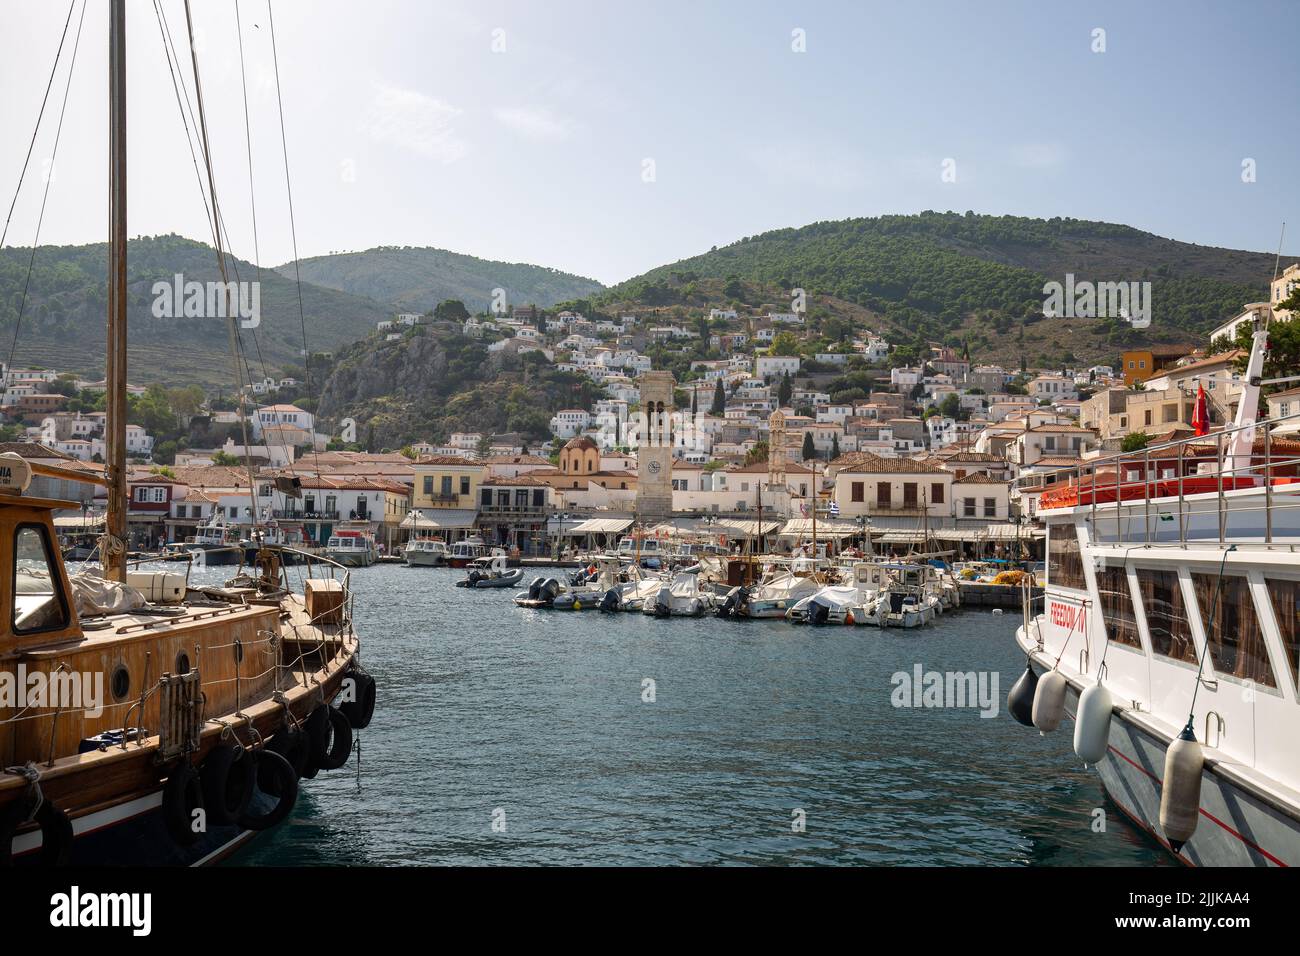 A natural view of yatch and boats on the coast of Hydra island in Athens, Greece Stock Photo